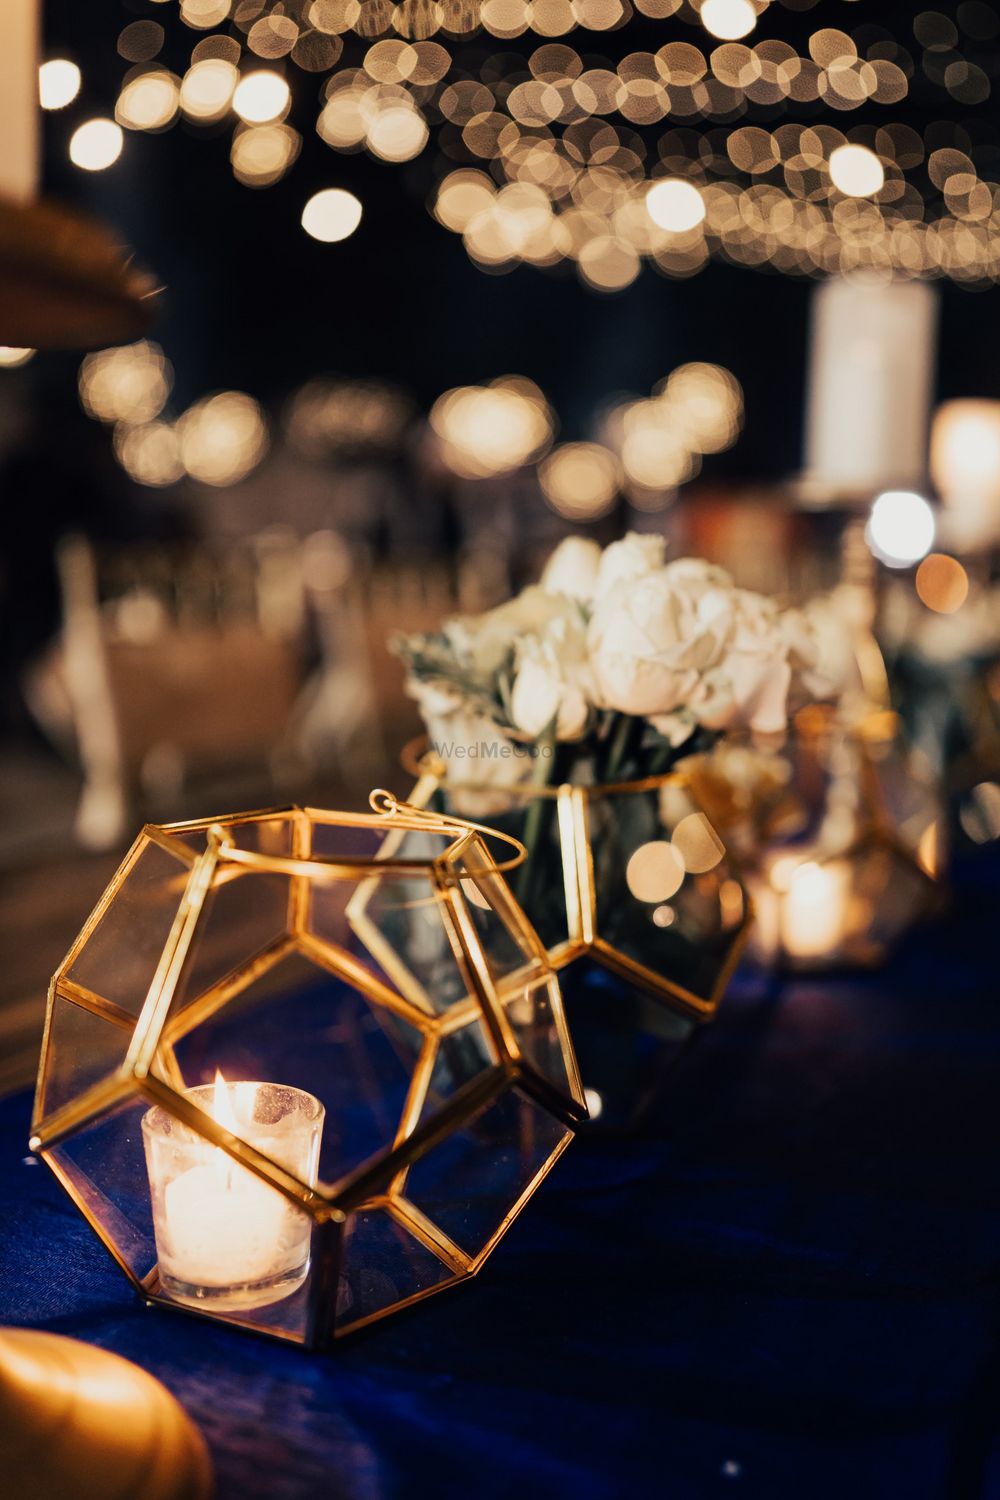 Photo of Terrariums with candles used as table centrepieces.